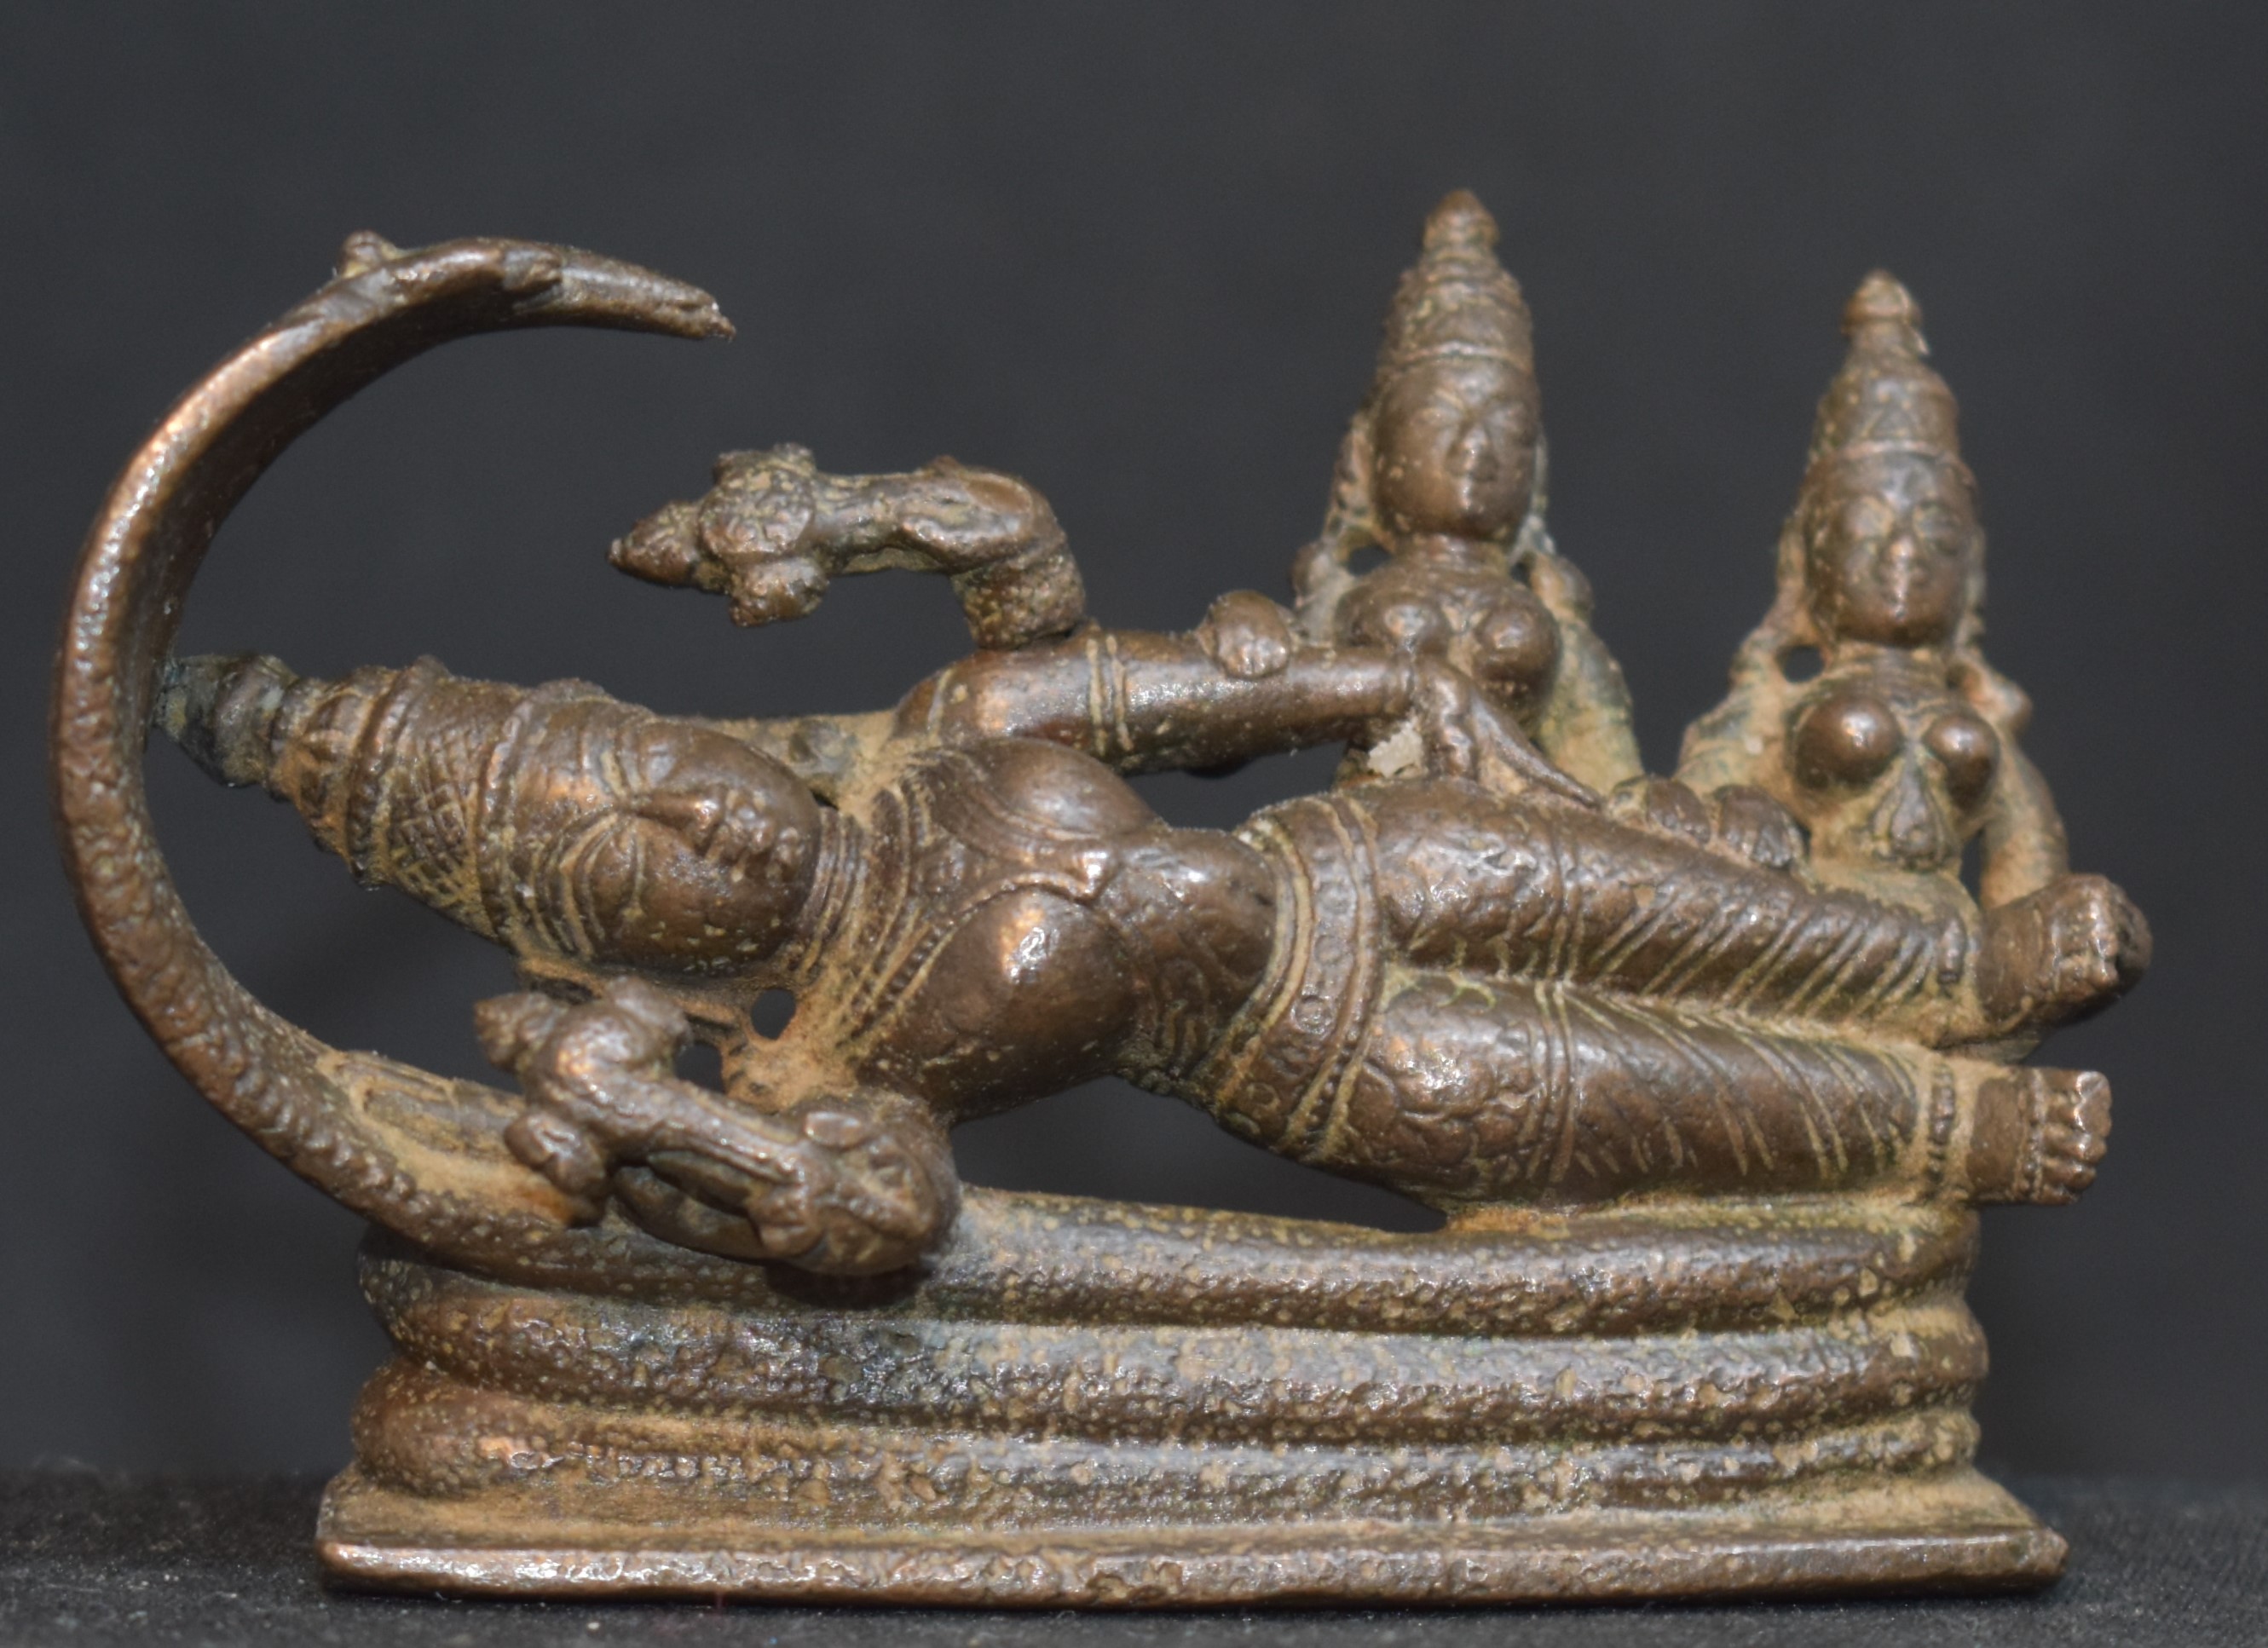 Is there a connection between the sleeping posture of Lord Buddha and Lord  Vishnu? - Quora